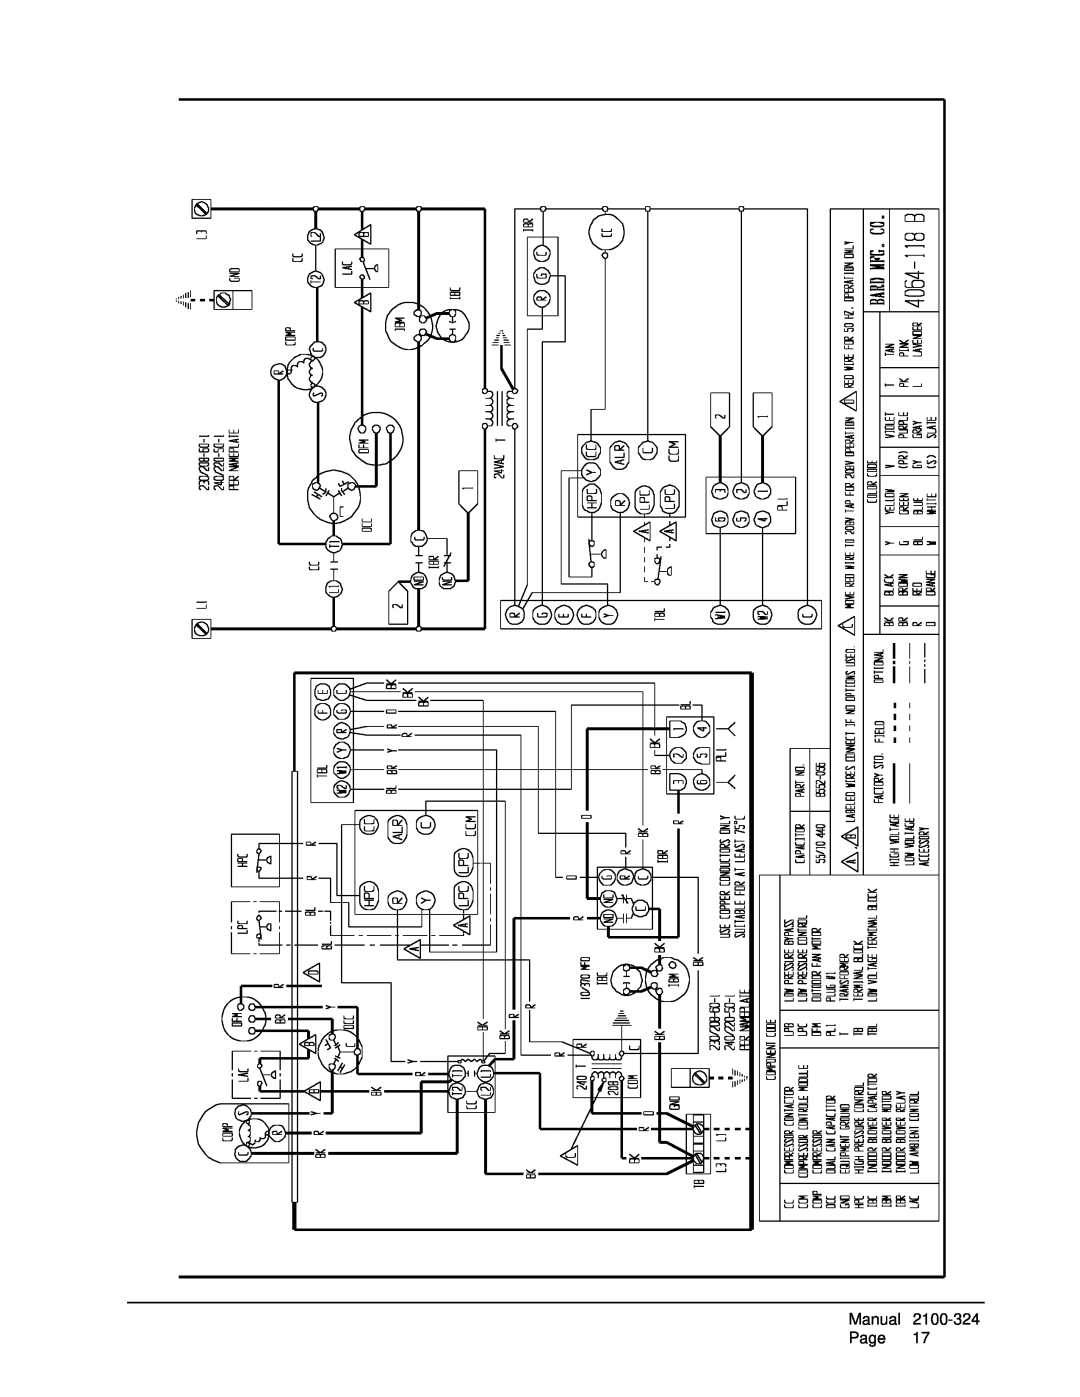 Bard P1142A3, P1148A1, P1060A1 installation instructions Manual, Page 